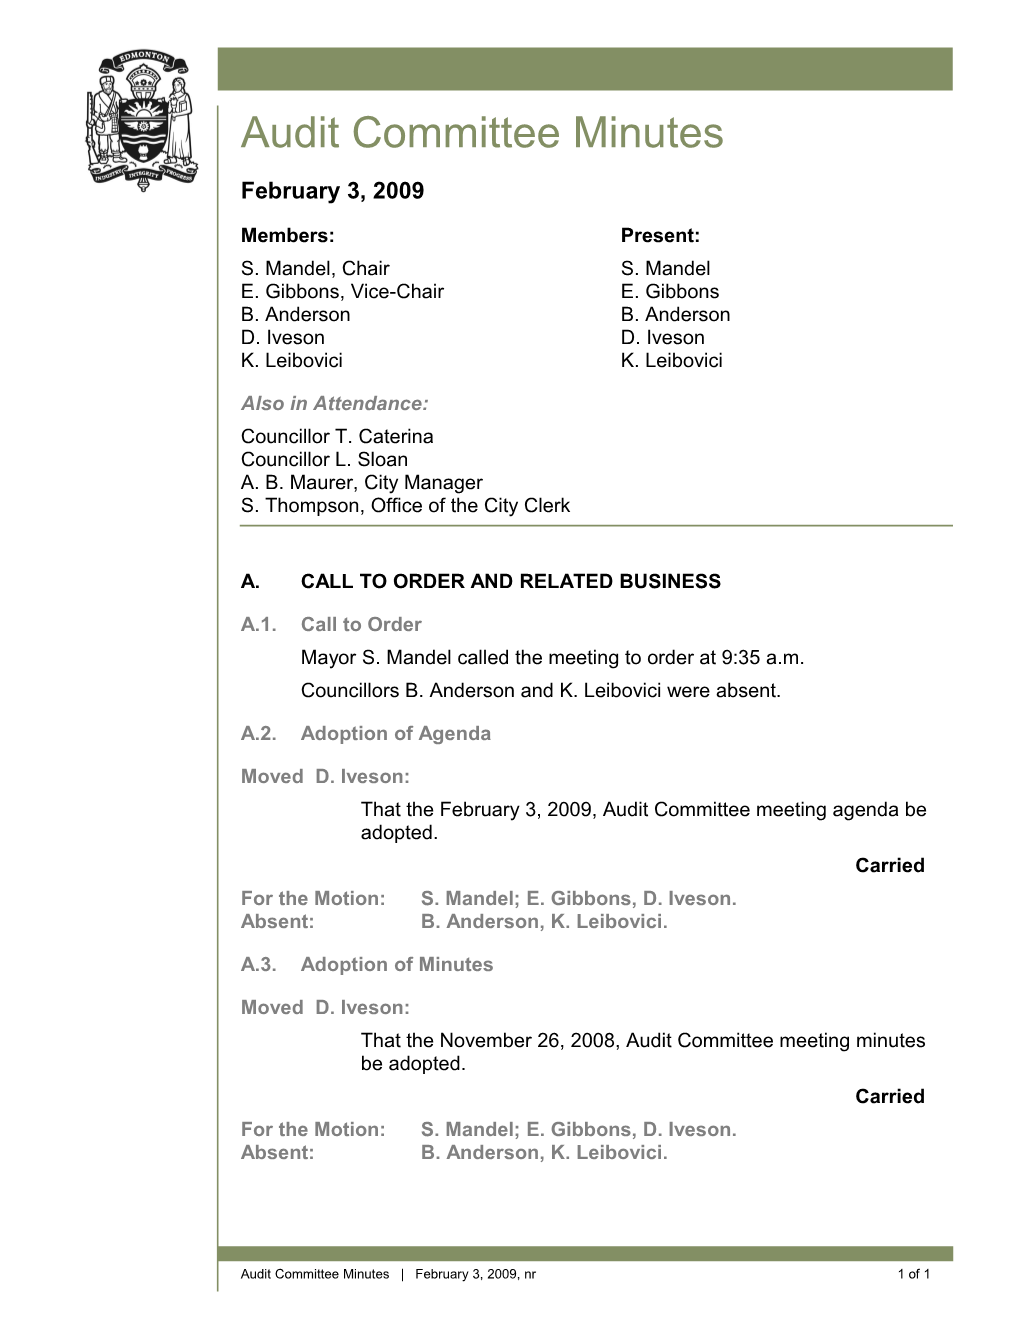 Minutes for Audit Committee February 3, 2009 Meeting